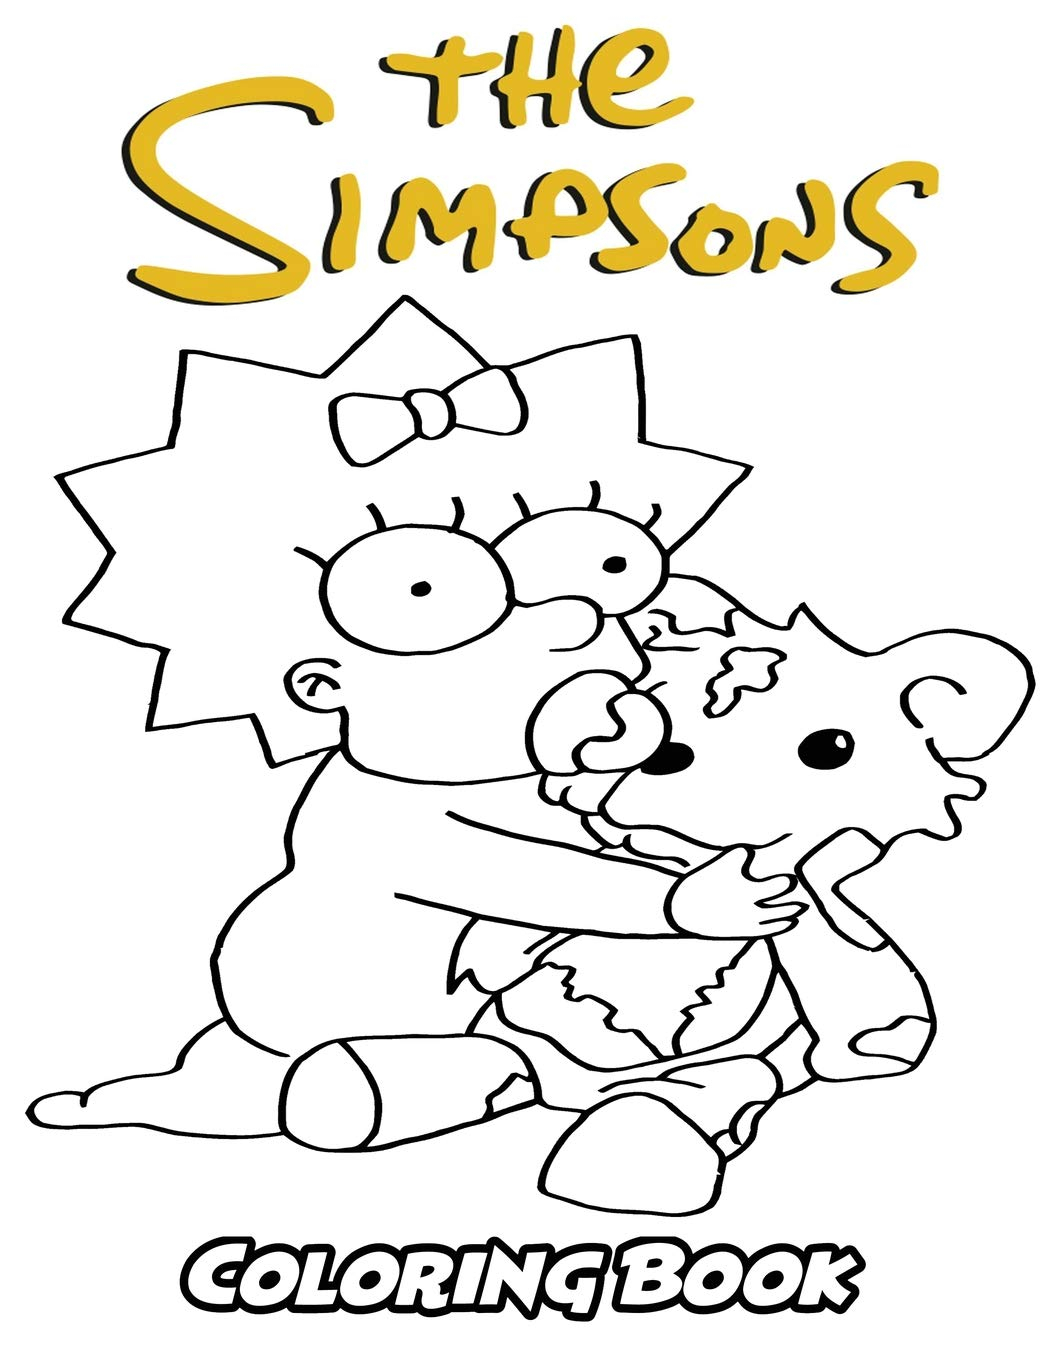 The Simpsons Coloring Pages Coloring Design Coloring Pages Amazon Com The Simpsons Book